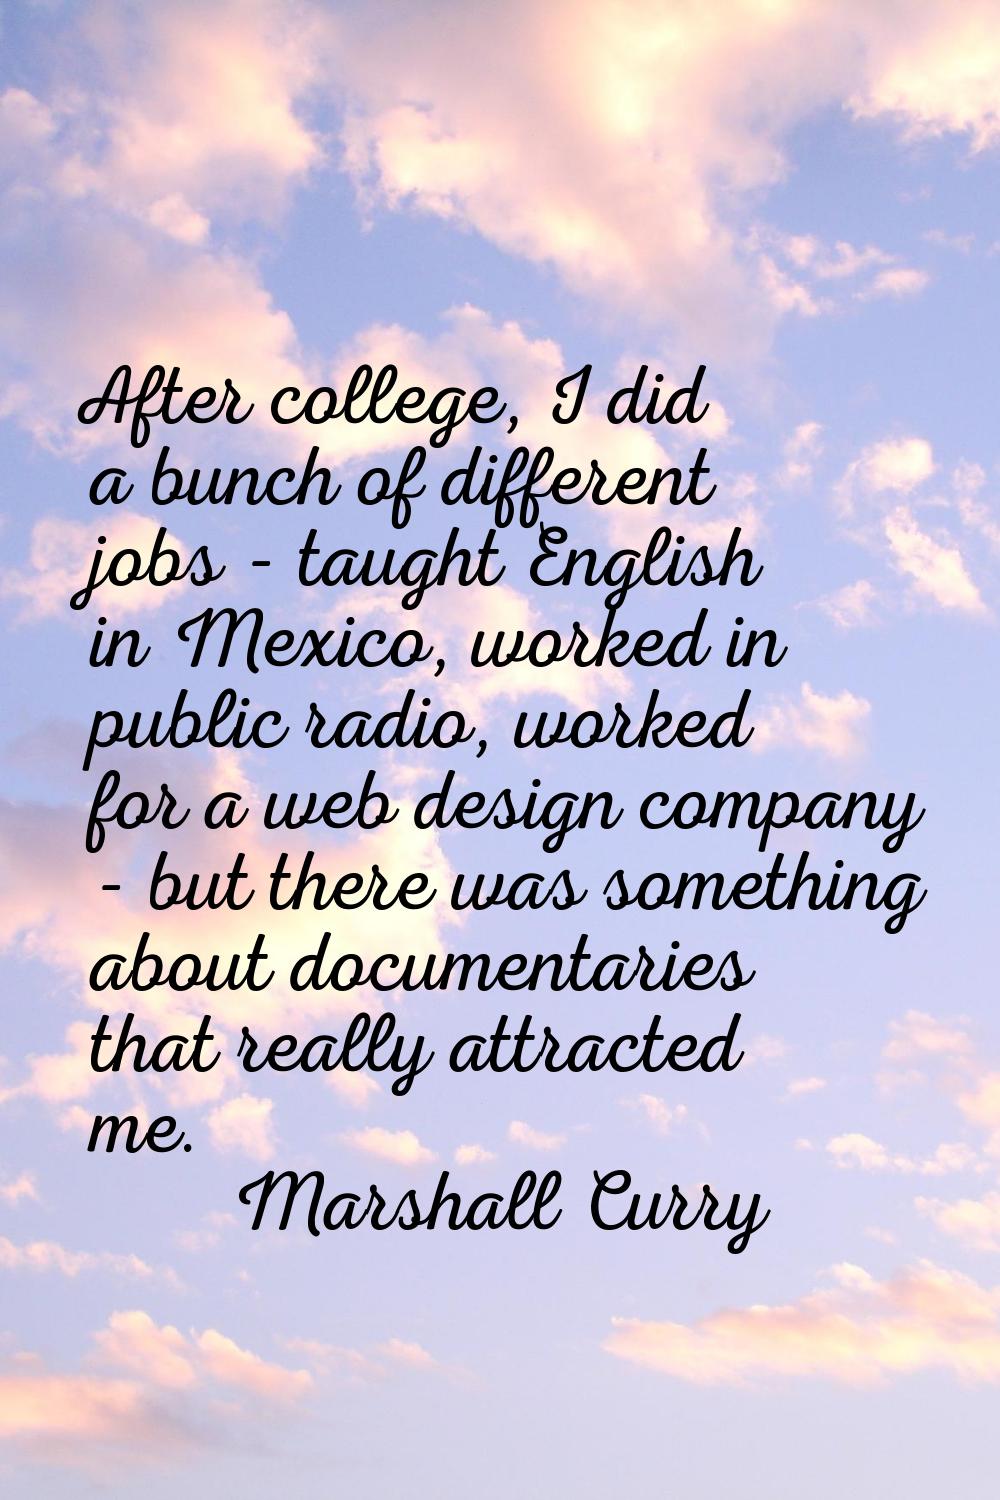 After college, I did a bunch of different jobs - taught English in Mexico, worked in public radio, 